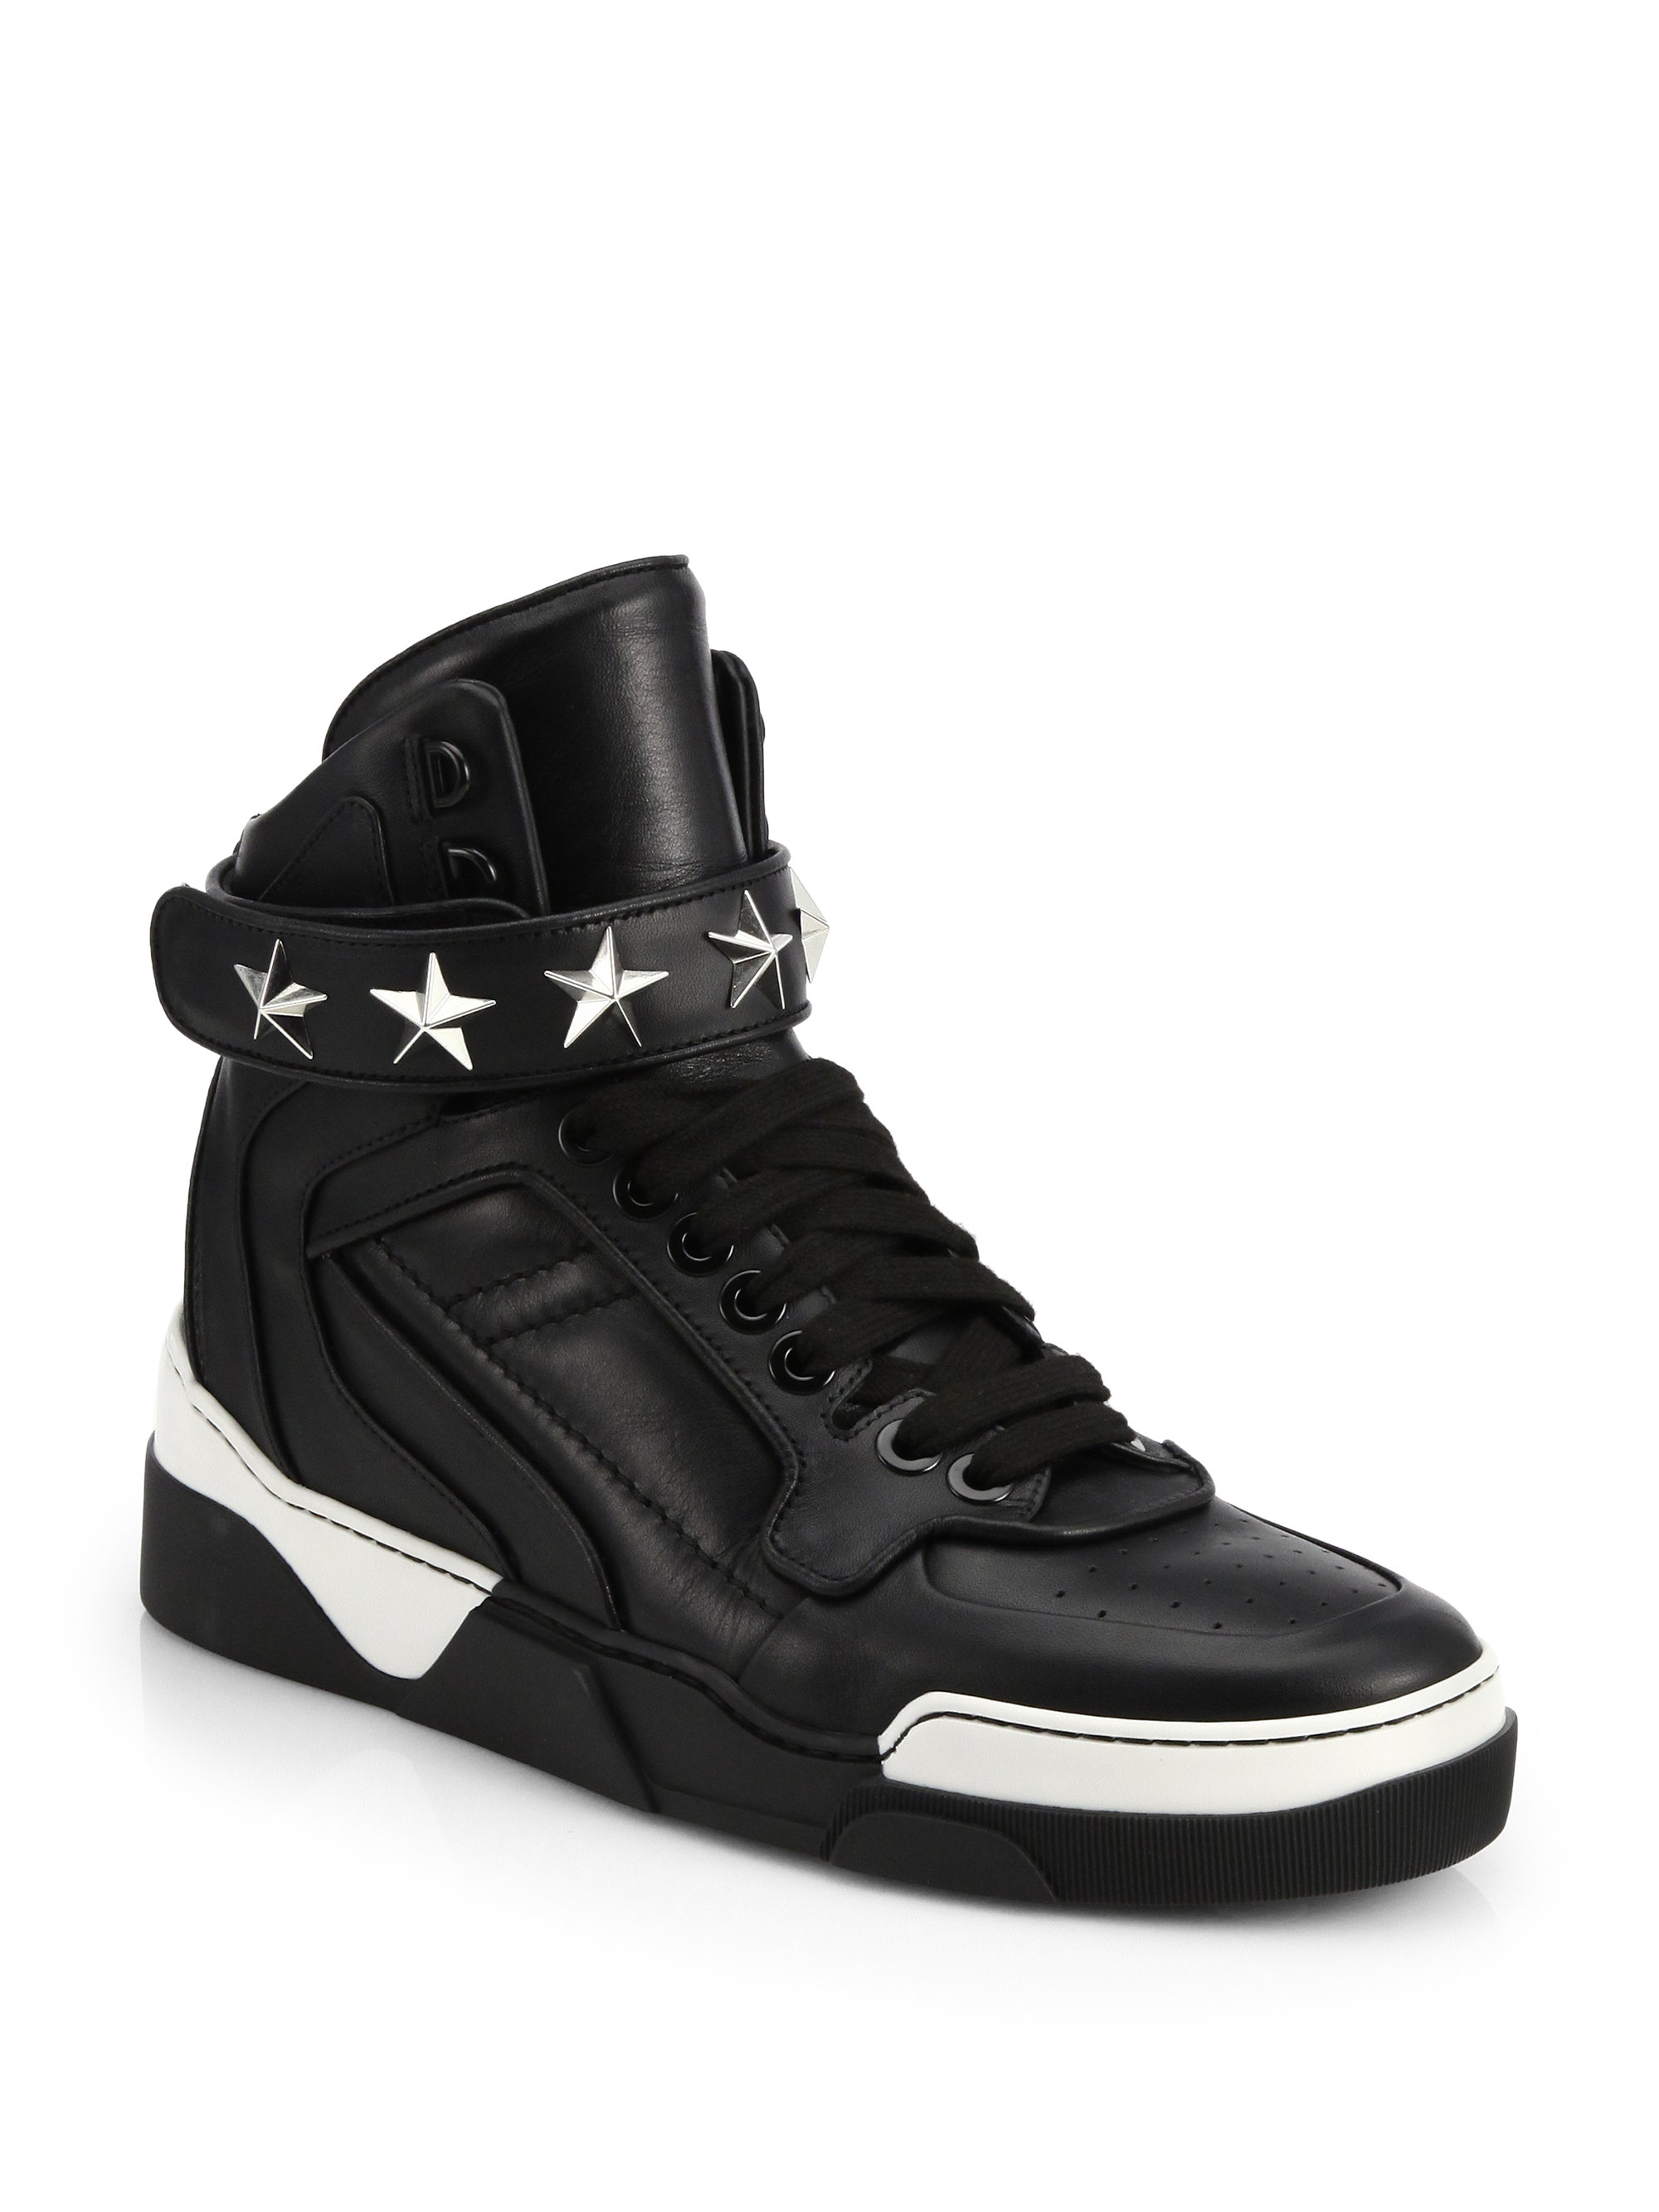 Givenchy Tyson Leather High-top Sneakers in Black for Men | Lyst